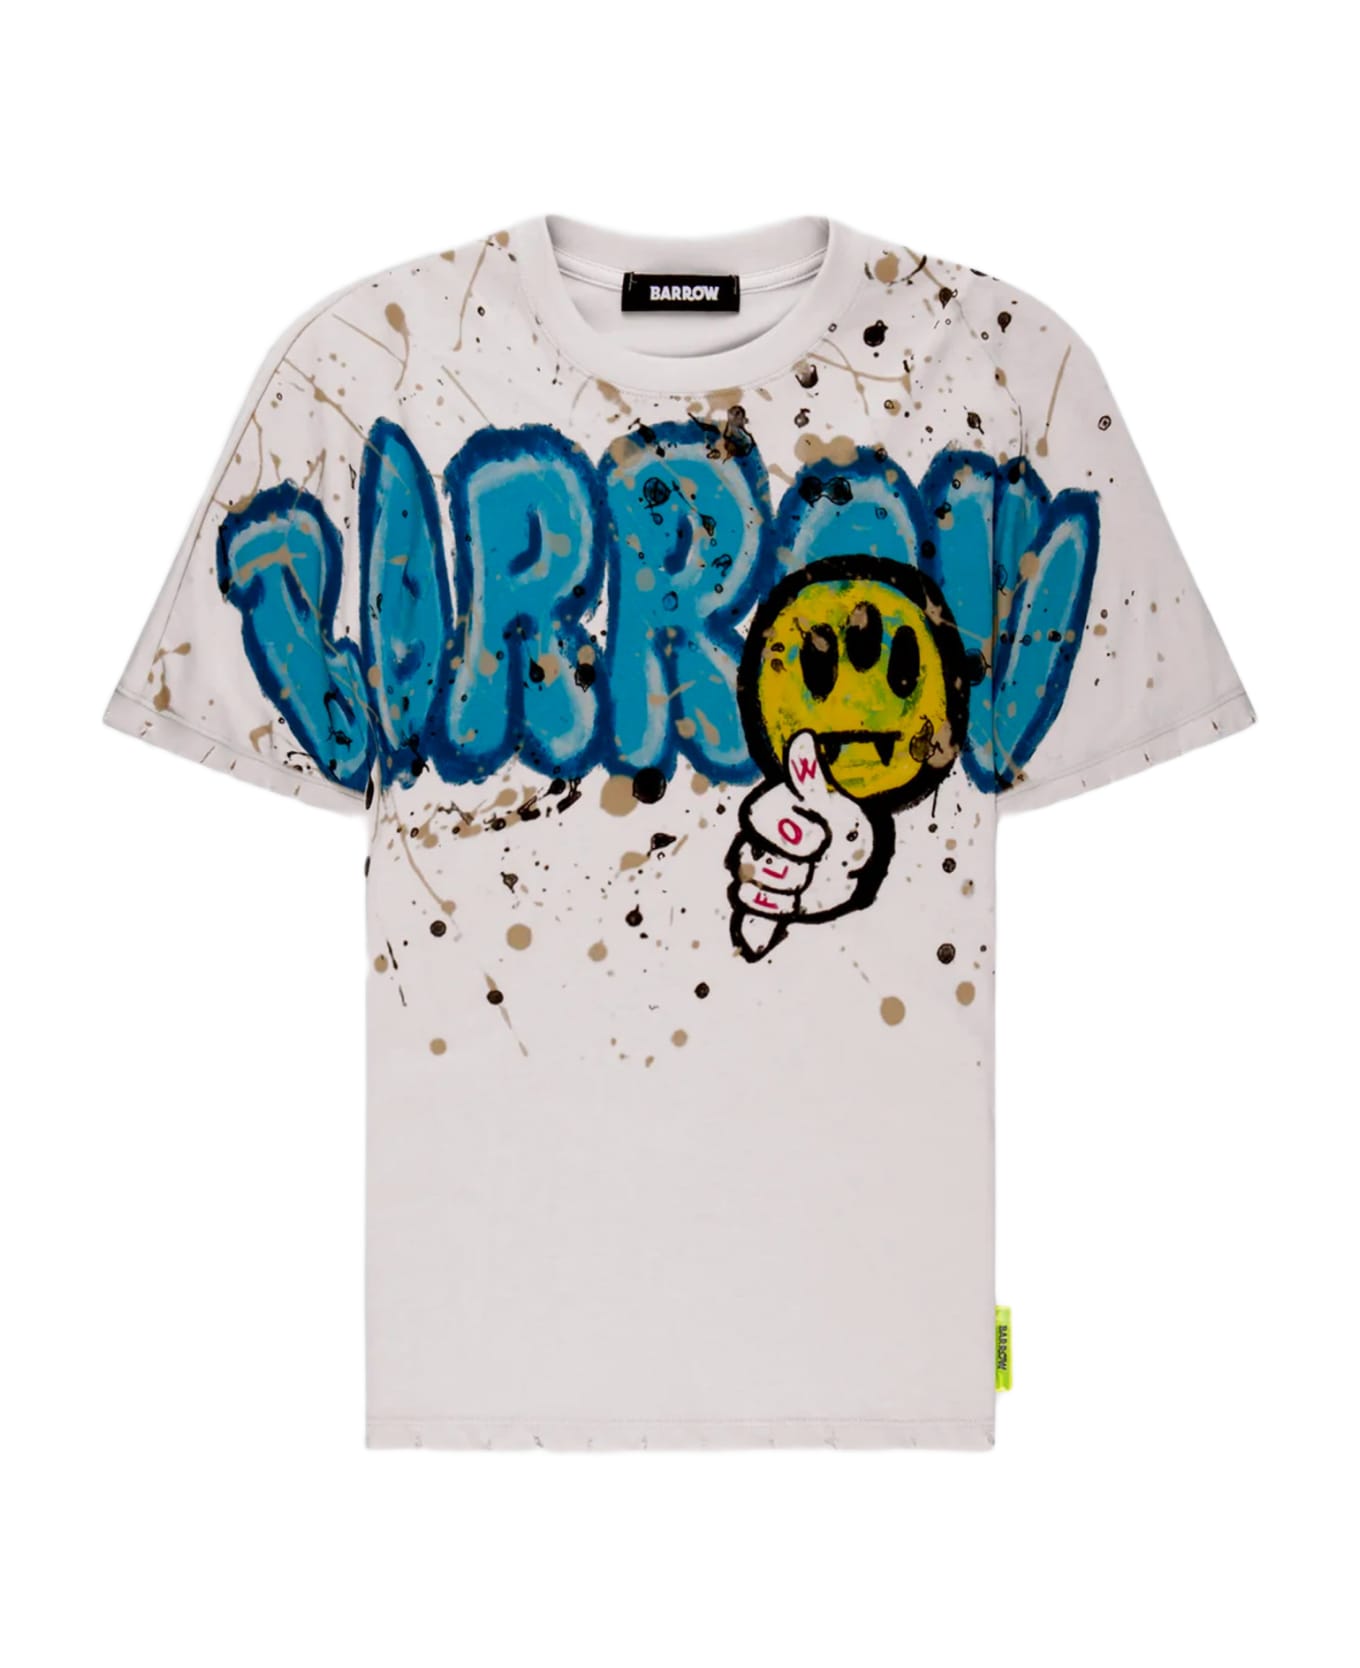 Barrow Jersey T-shirt Unisex Off white cotton t-shirt with graffiti logo and smile print - Crema シャツ